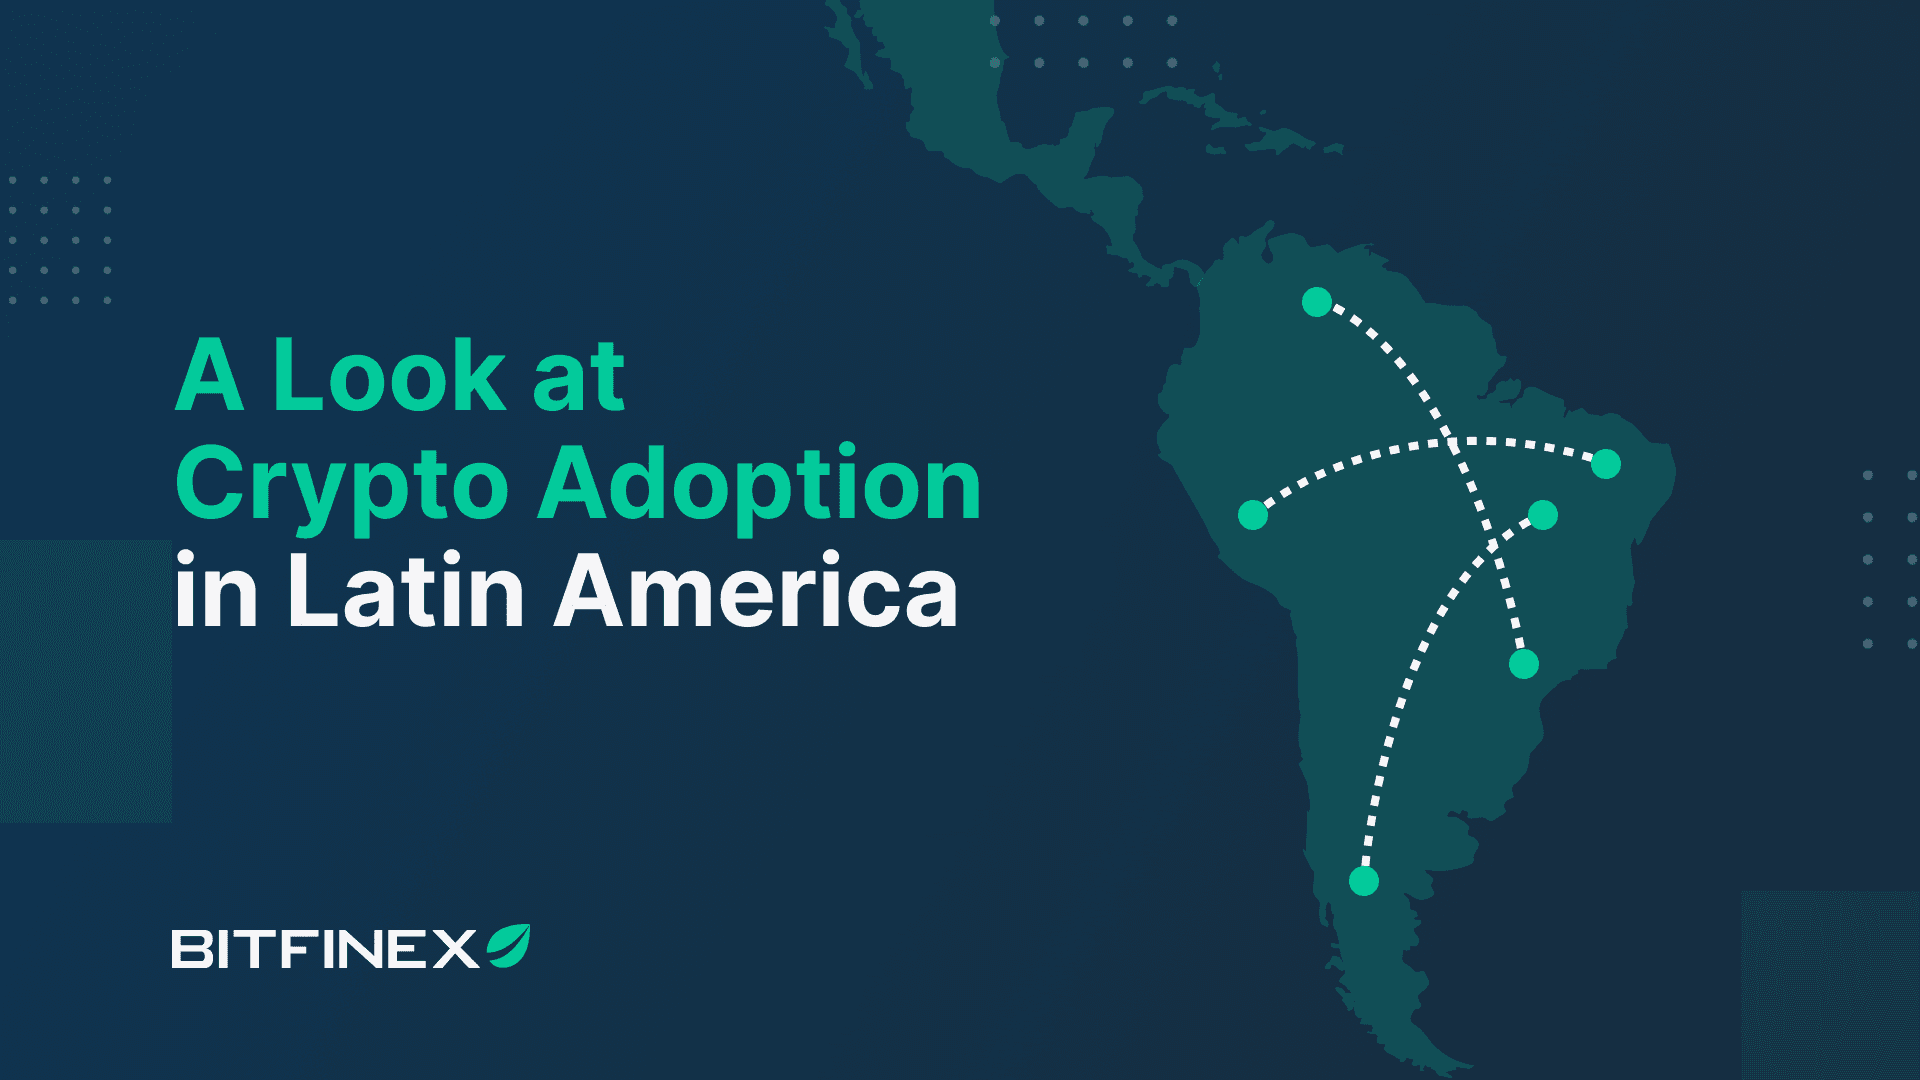 A Look at Crypto Adoption in Latin America